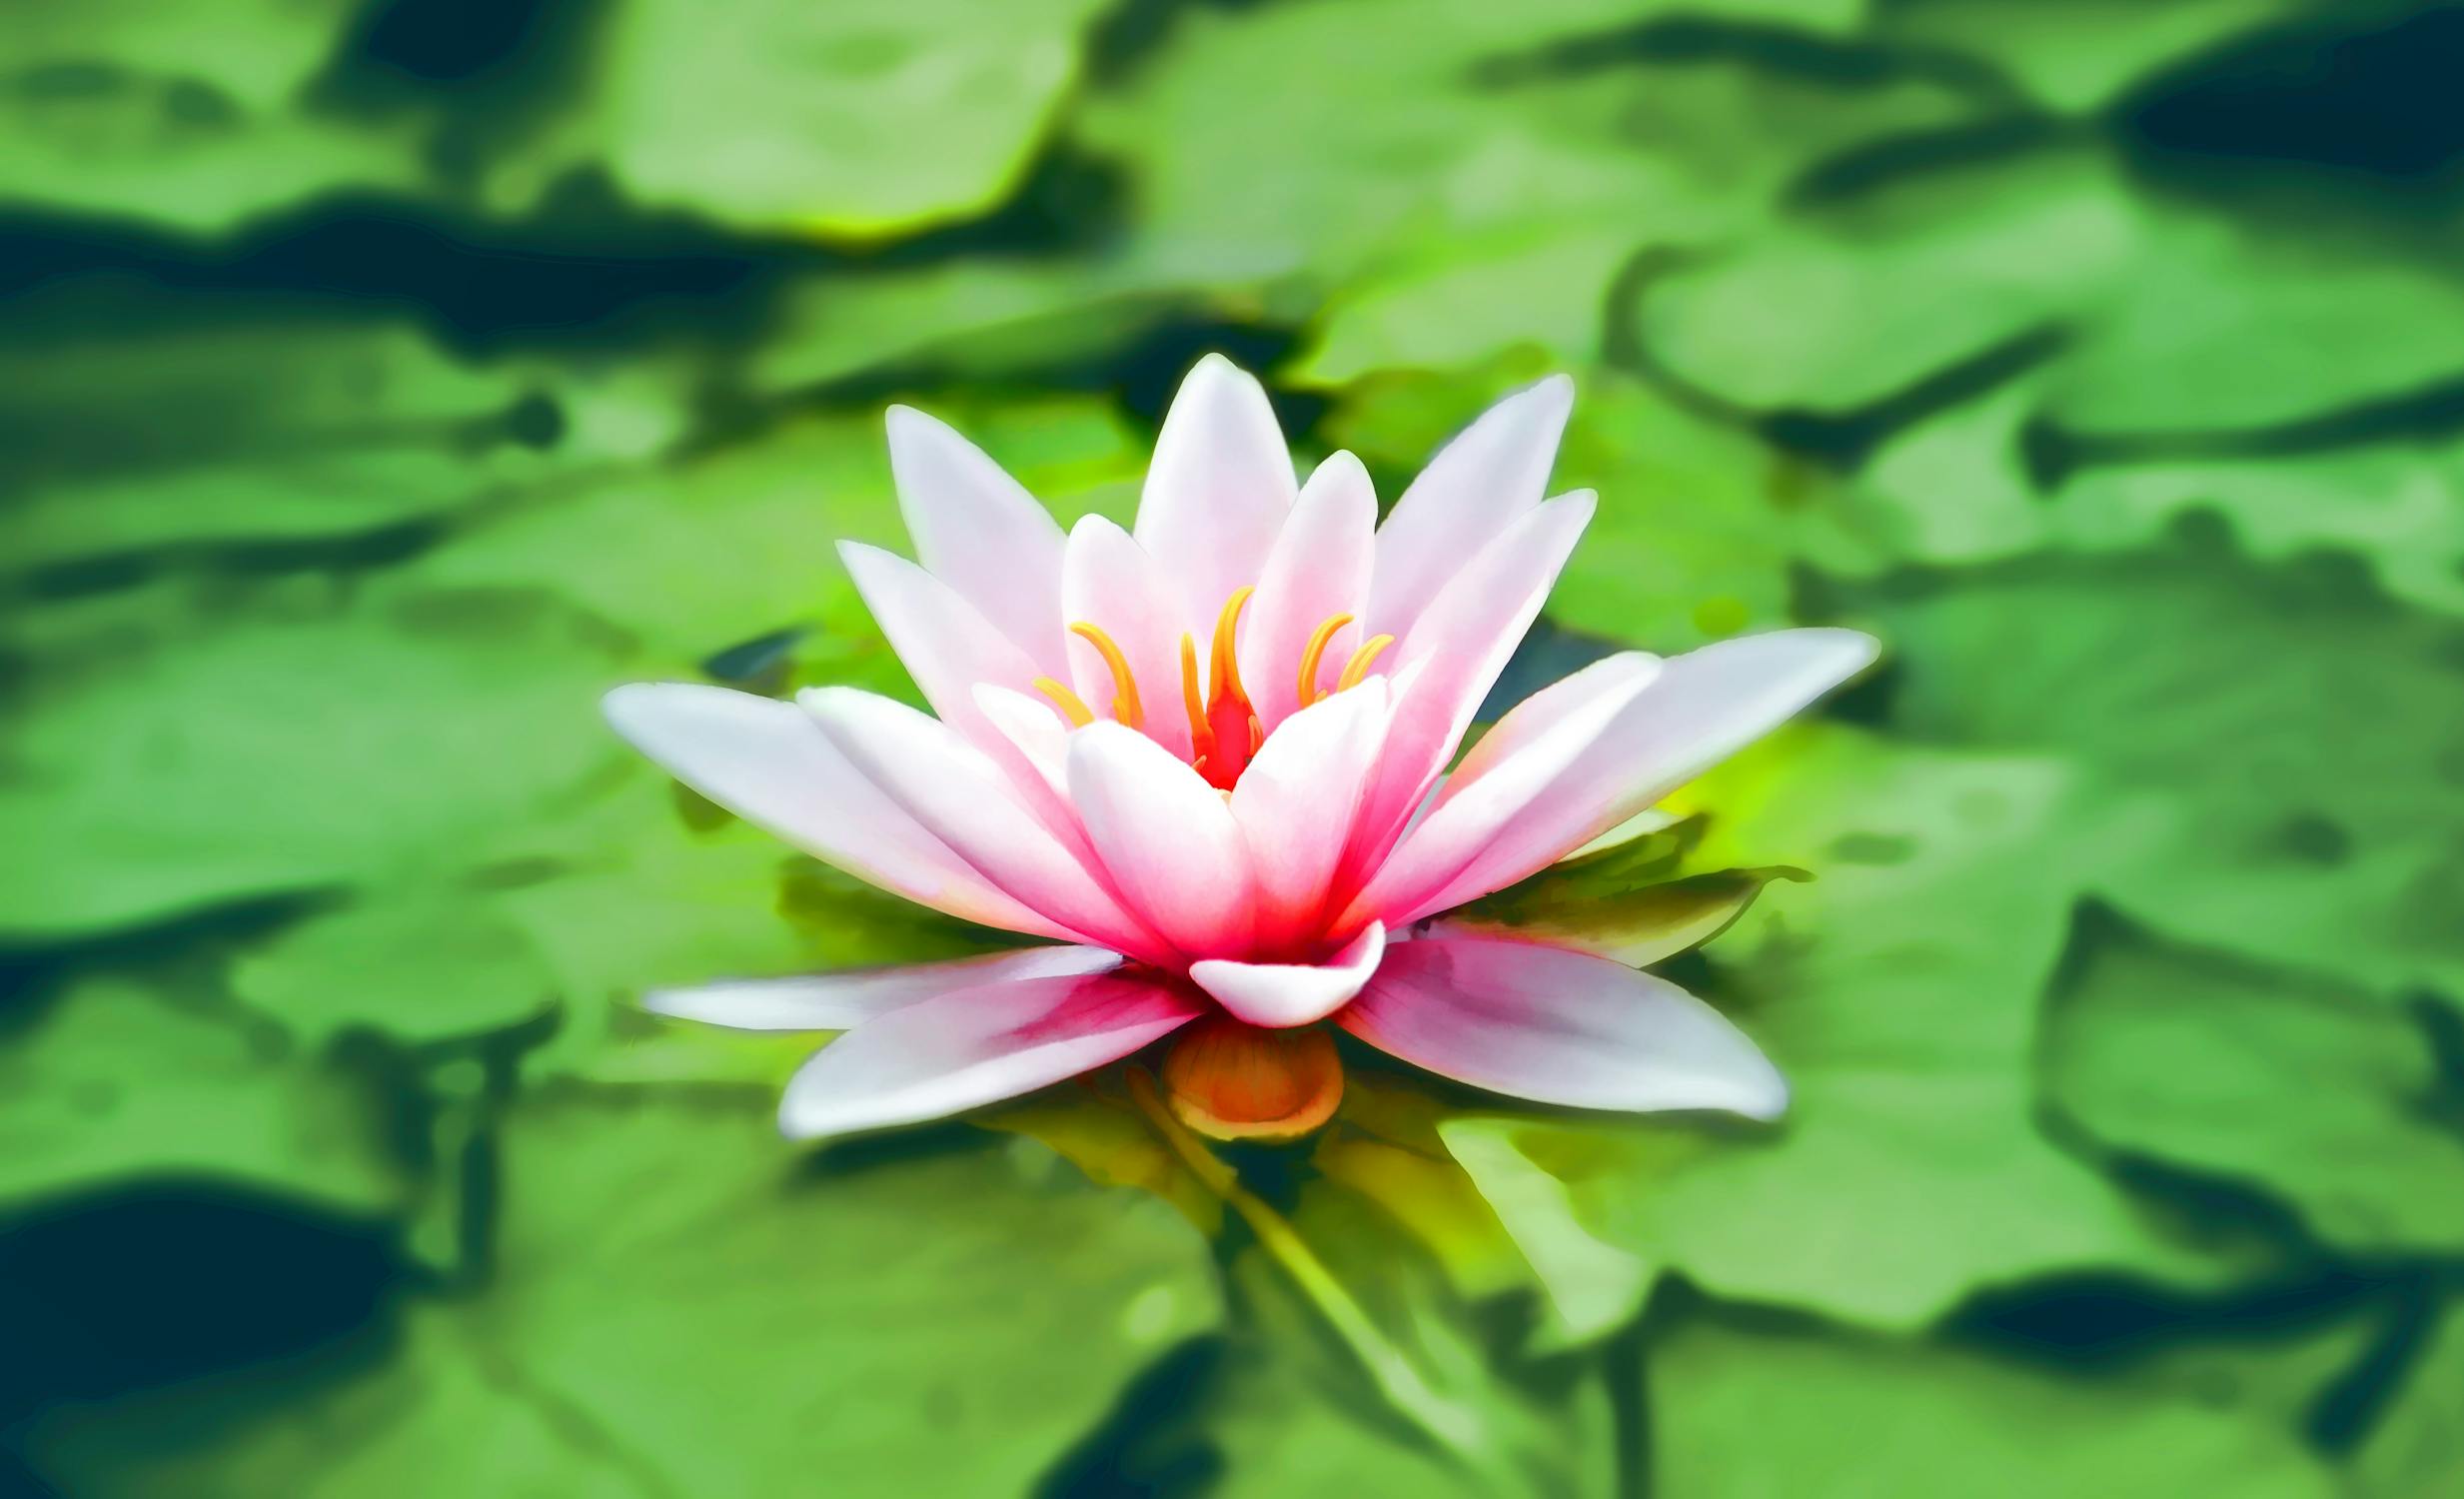 https://images.pexels.com/photos/158465/waterlily-pink-water-lily-water-plant-158465.jpeg?auto=compress&cs=tinysrgb&dpr=2&h=750&w=1260